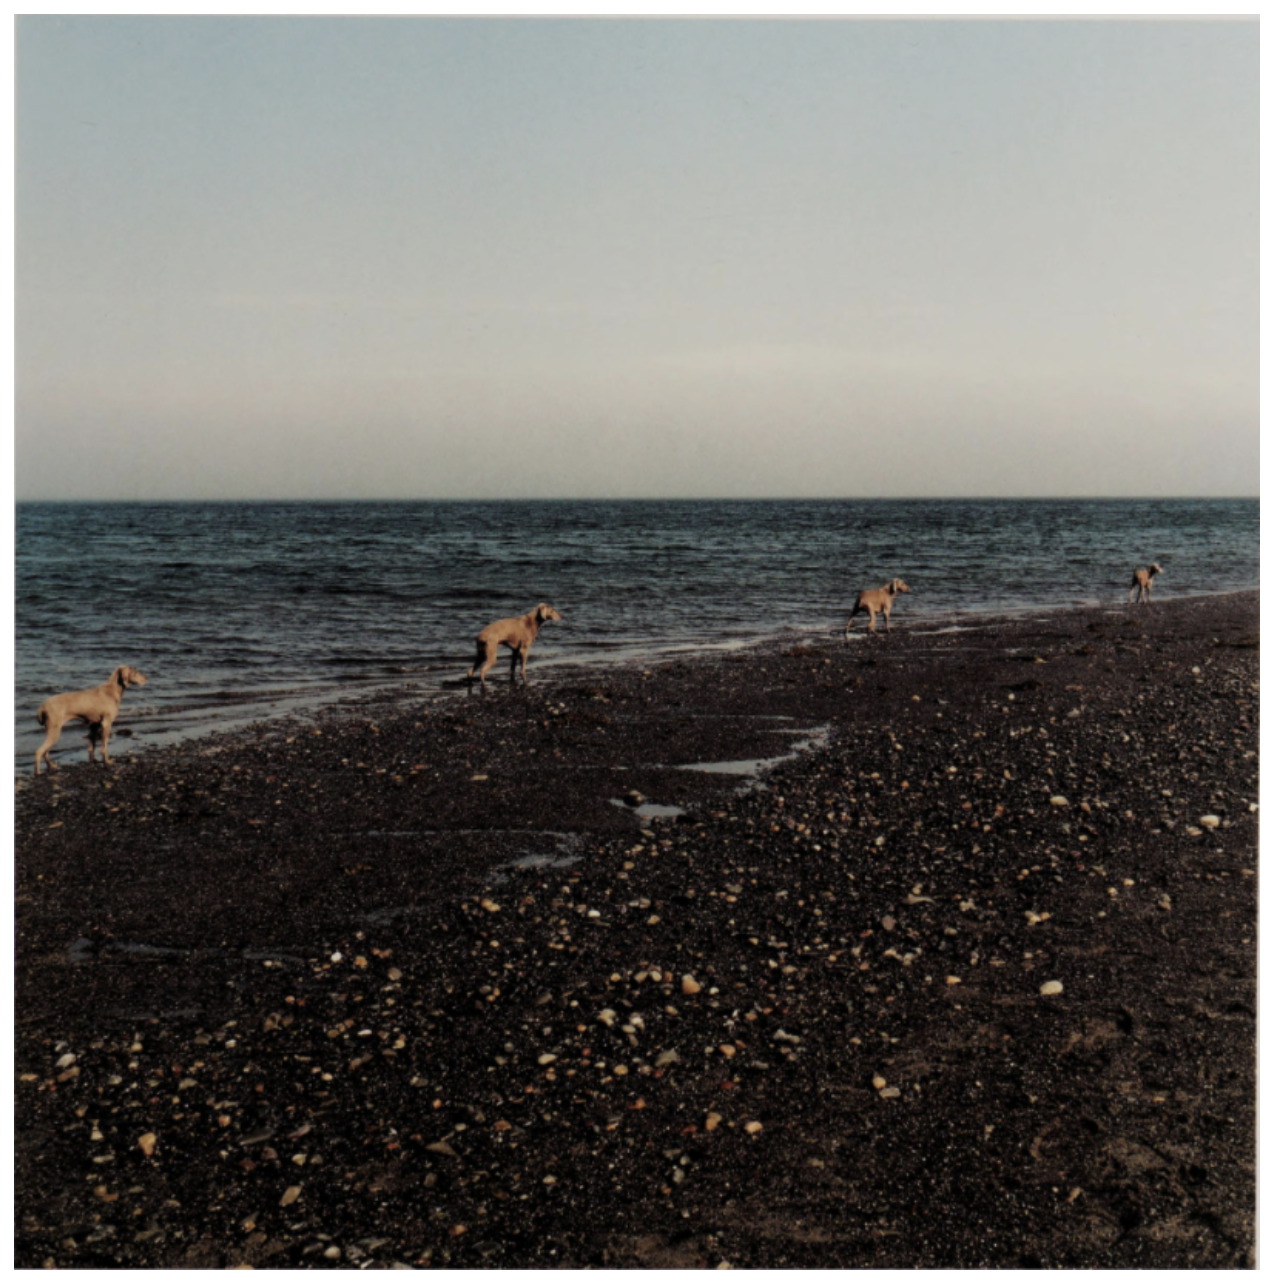 William Wegman’s four dogs—Battina, Chippy, Chuundo, and Crooky— are walking in line along the tideline, distancing each other. At the beginning of 1999, the Nature Conservancy invited the photographers of the time to take pictures at some of the landscapes where nature had not yet been lost and still sustainable. Wegman ventured with his dogs and reached Cobscook Bay, an echo of those in the famous Bay of Fundy nearby. Cobscook Bay is known for its twenty-foot tides, and Wegman captured an intriguing moment where dogs and nature merged, reminding people of the importance of peaceful coexistence.